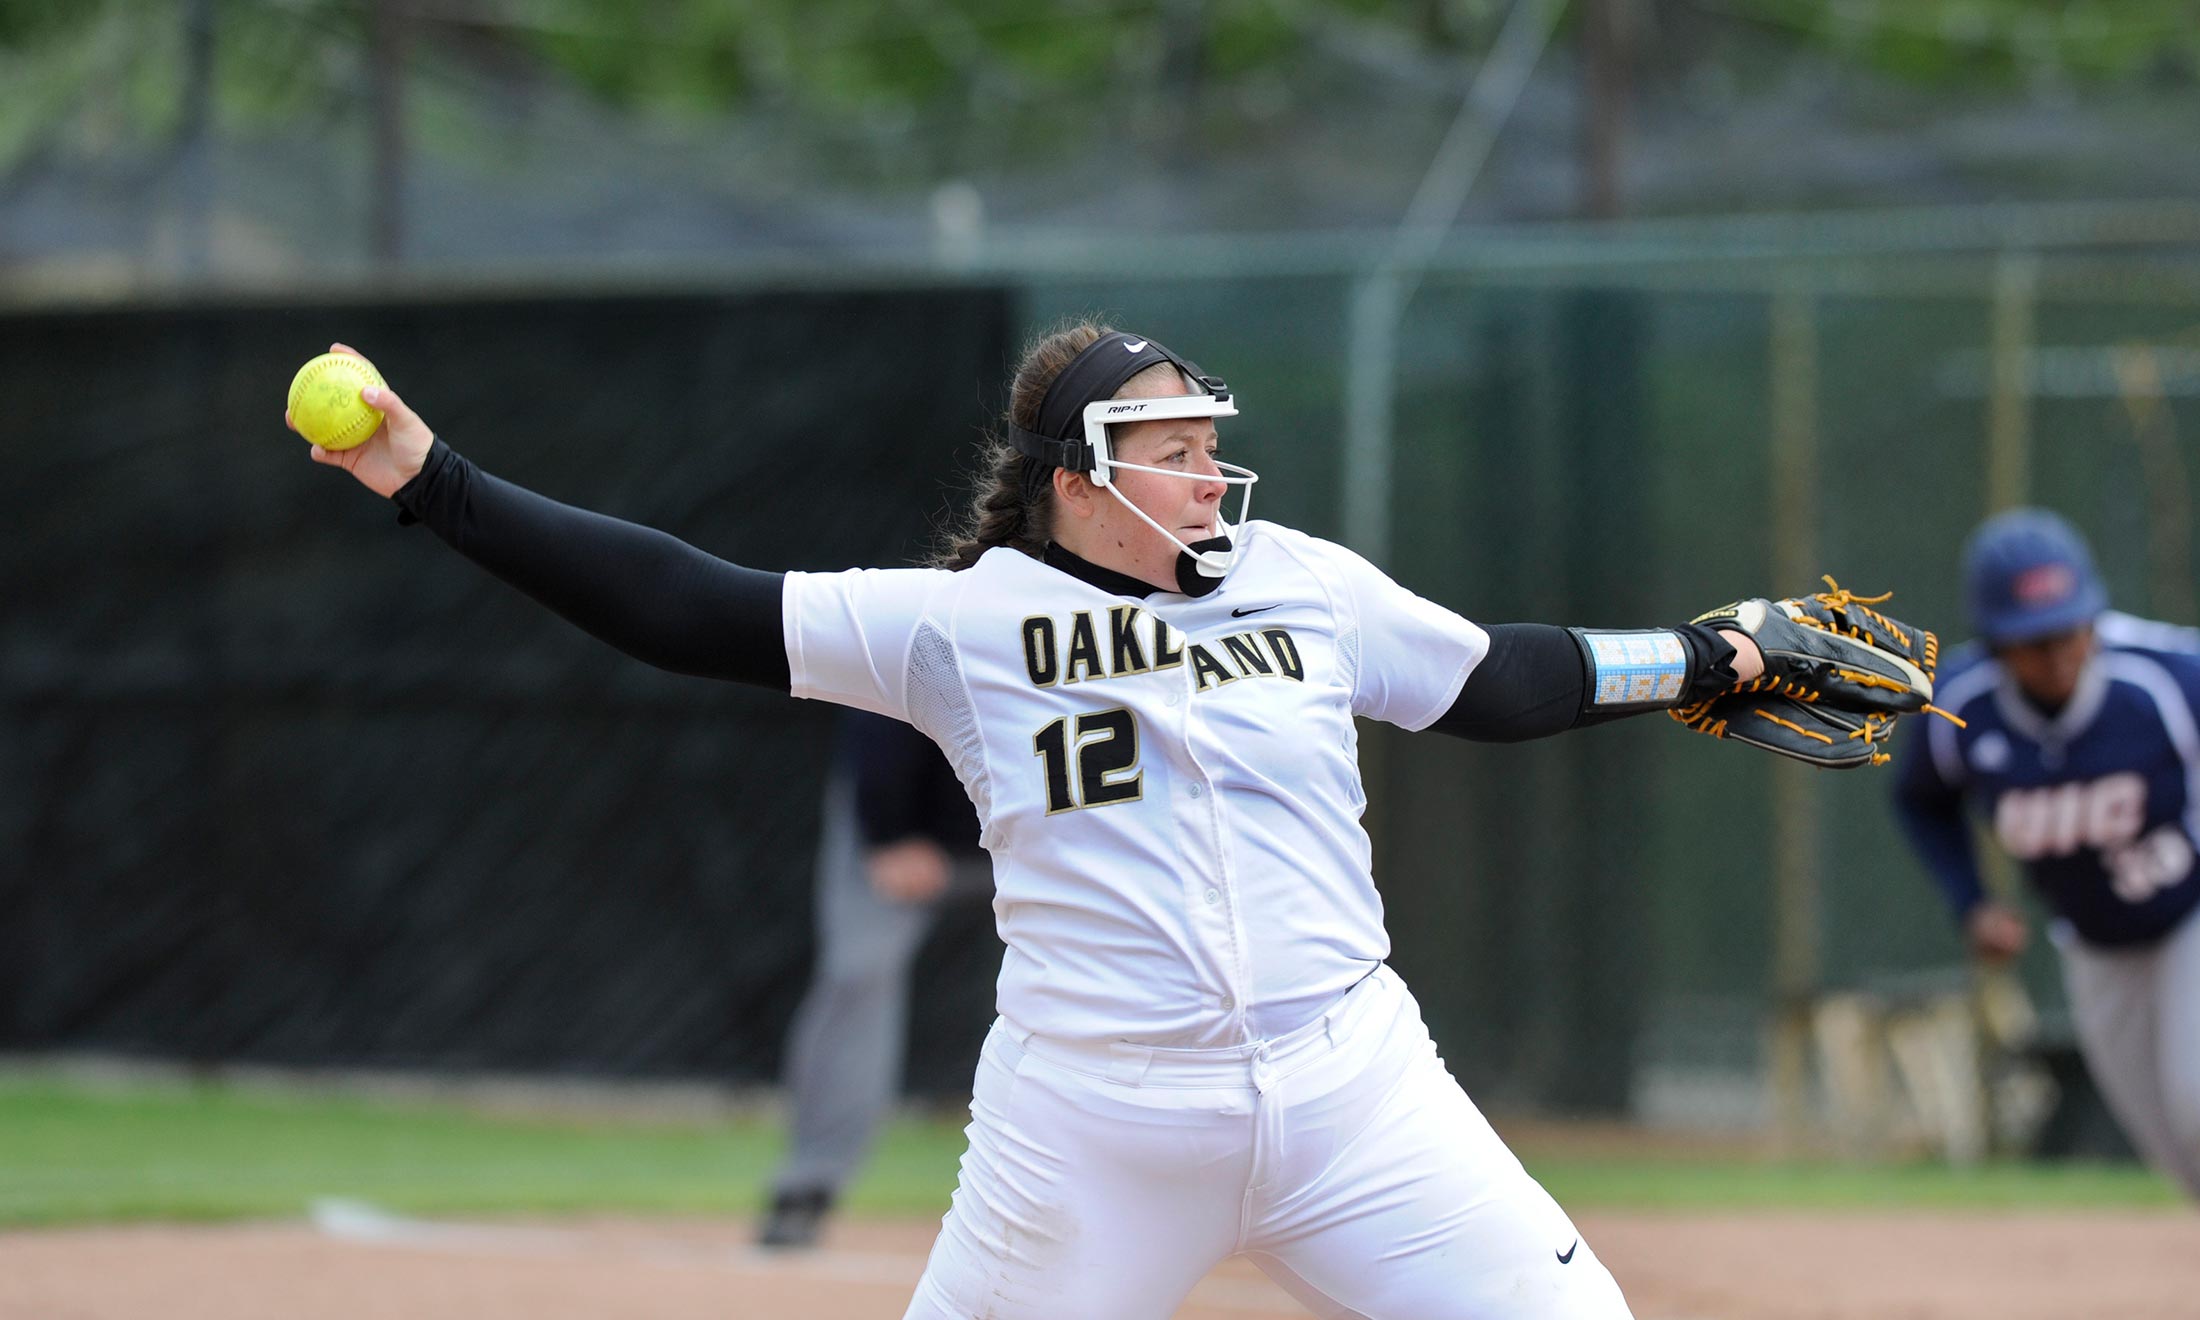 Oakland University softball star Erin Kownacki throws a pitch during a game